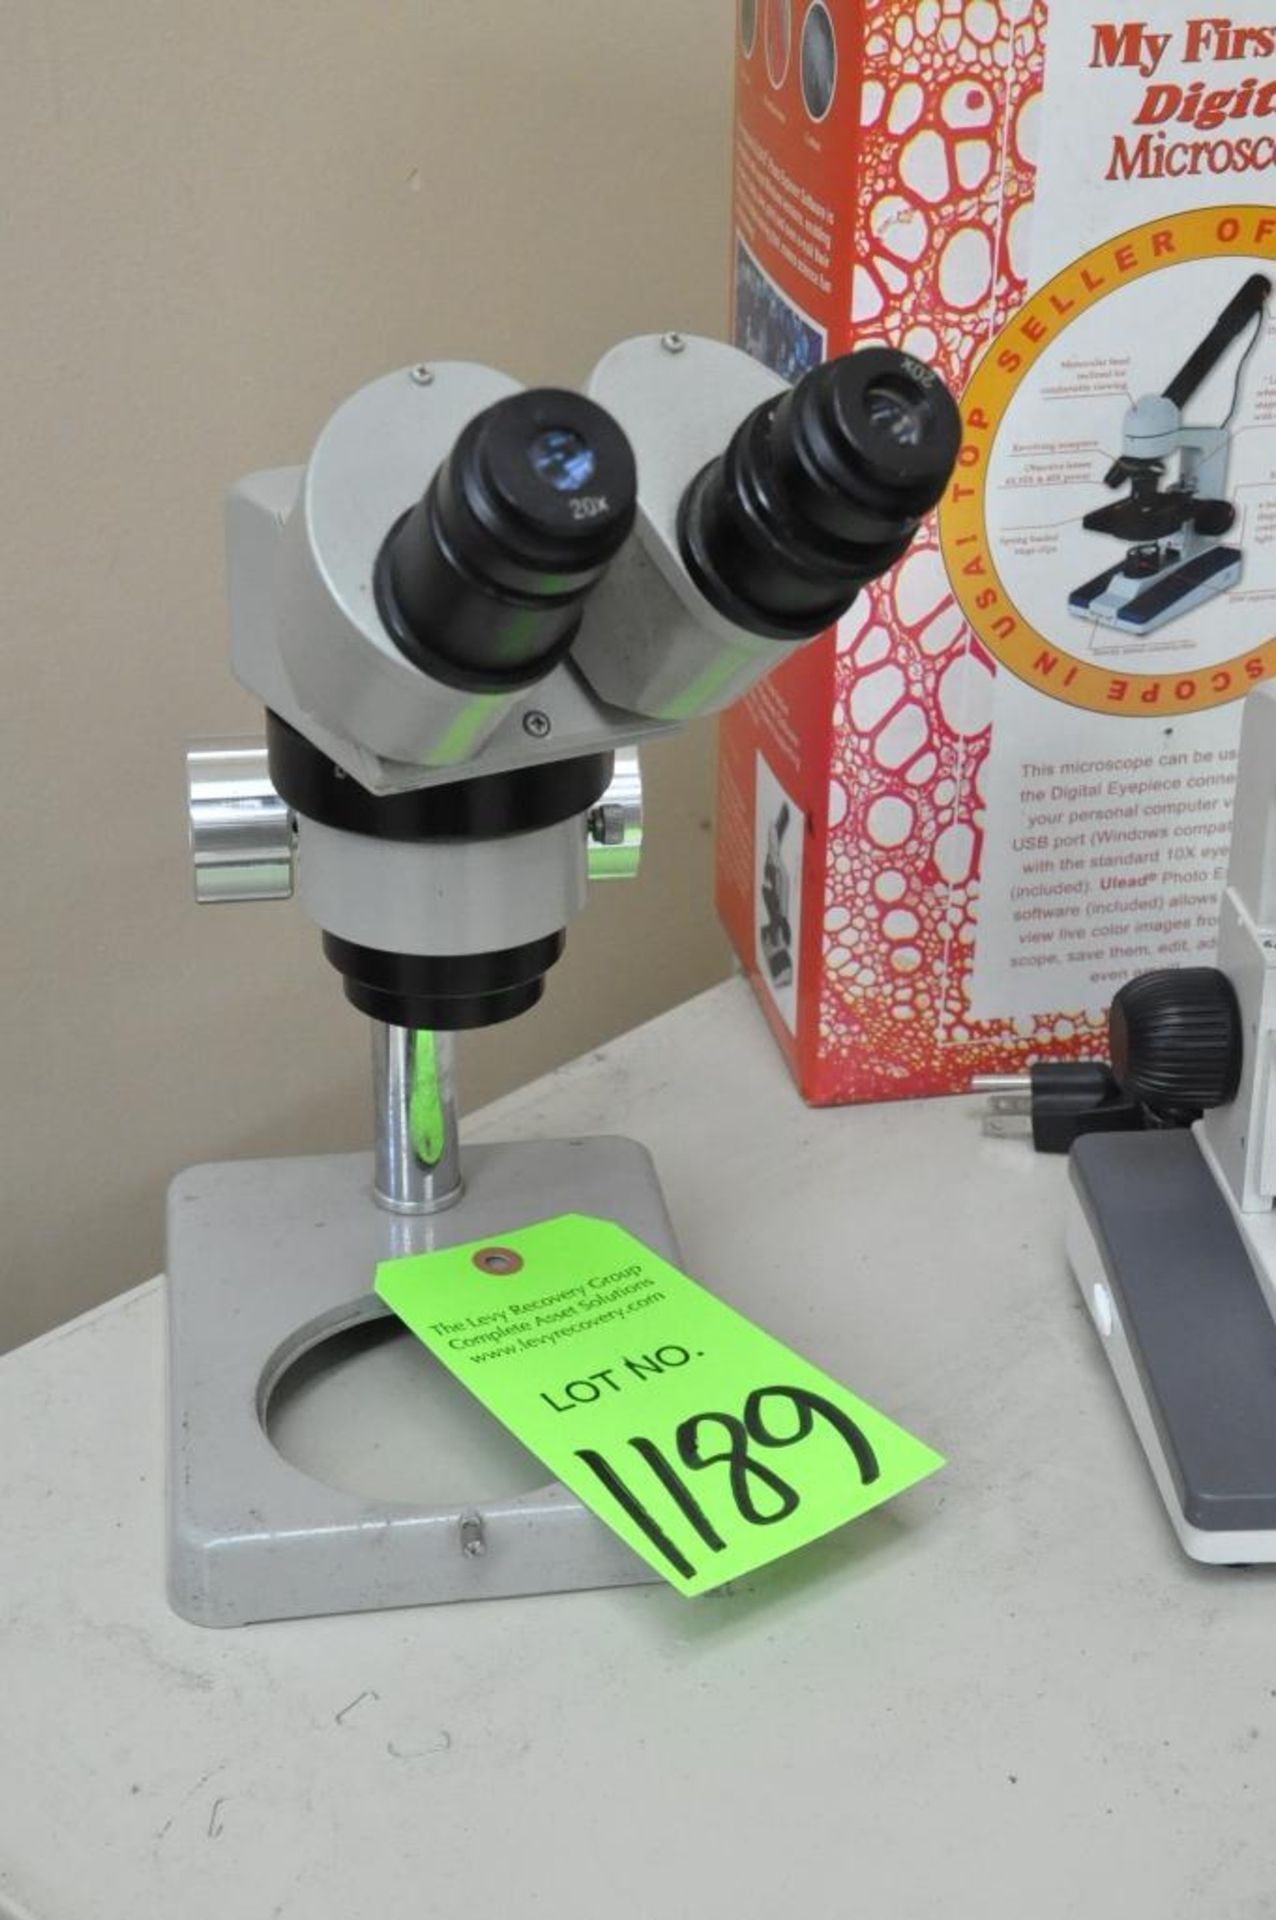 Lot-(1) "My First Lab" 10x Digital Microscope and (1) Titan 20x - Image 2 of 2